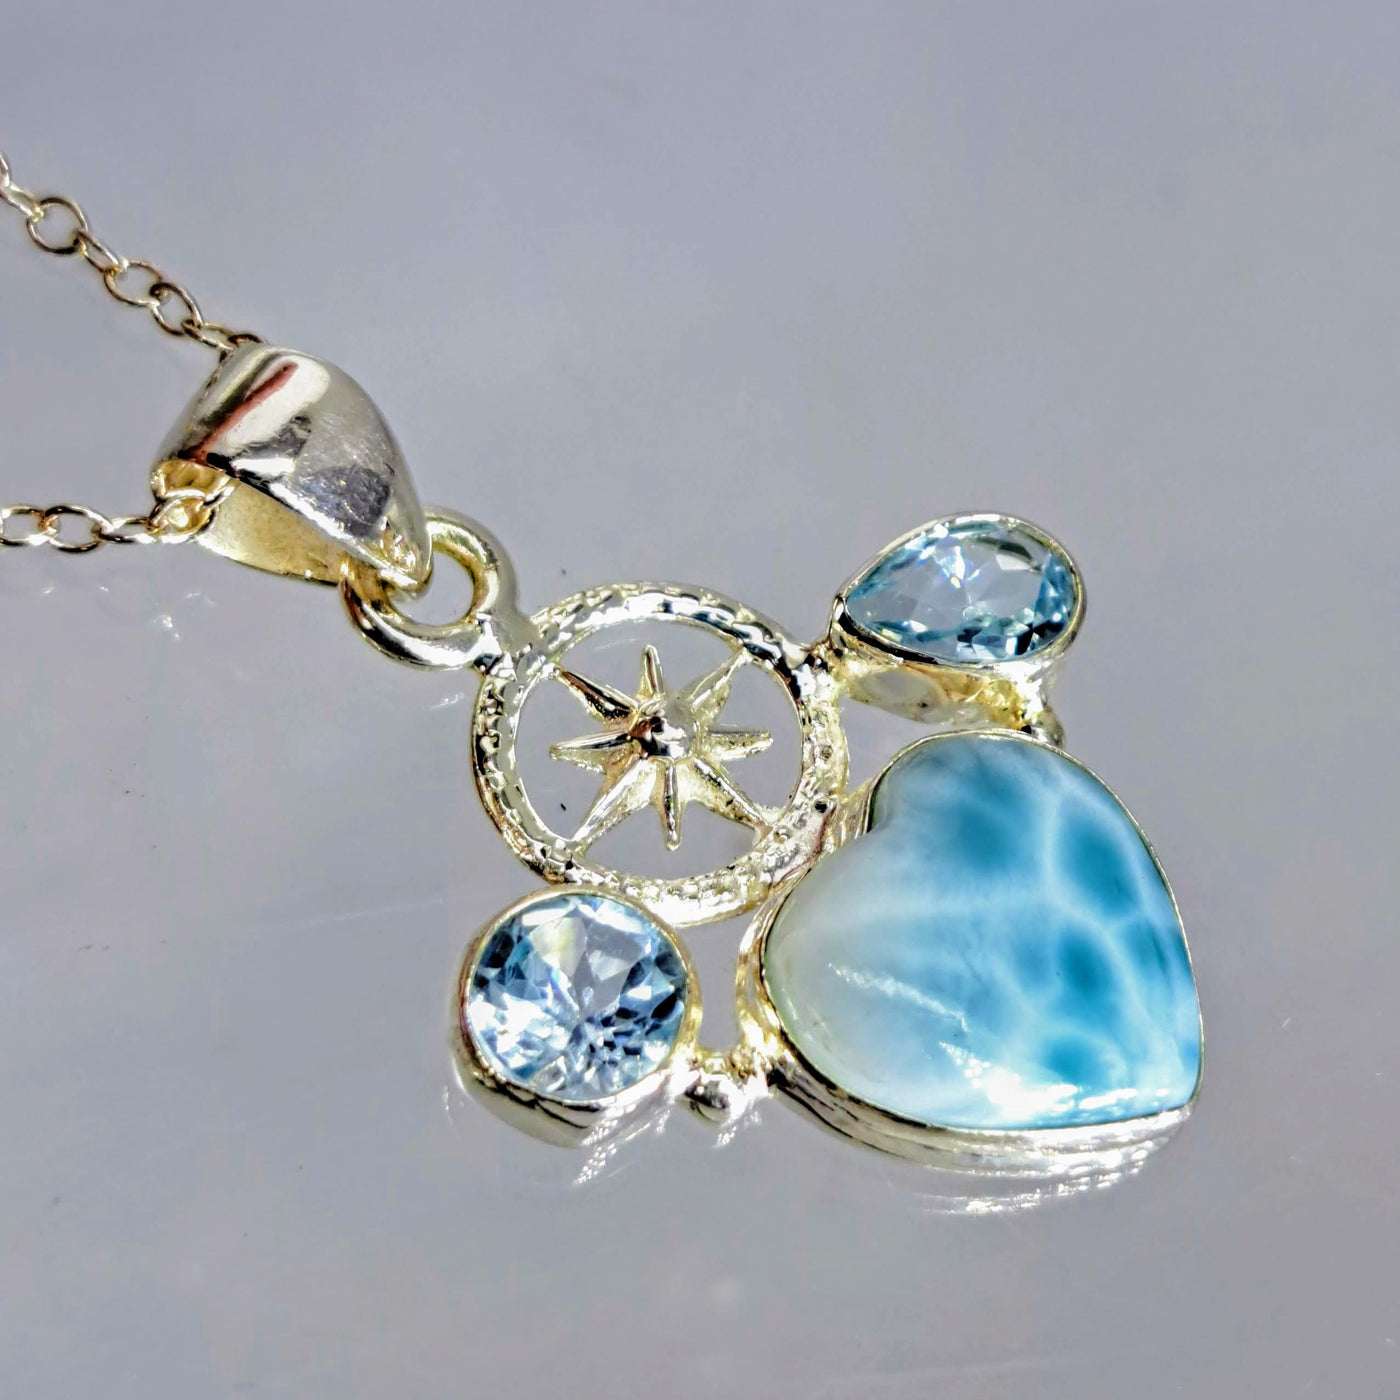 "The Way To You" 16" Necklace - Larimar, Topaz, Sterling